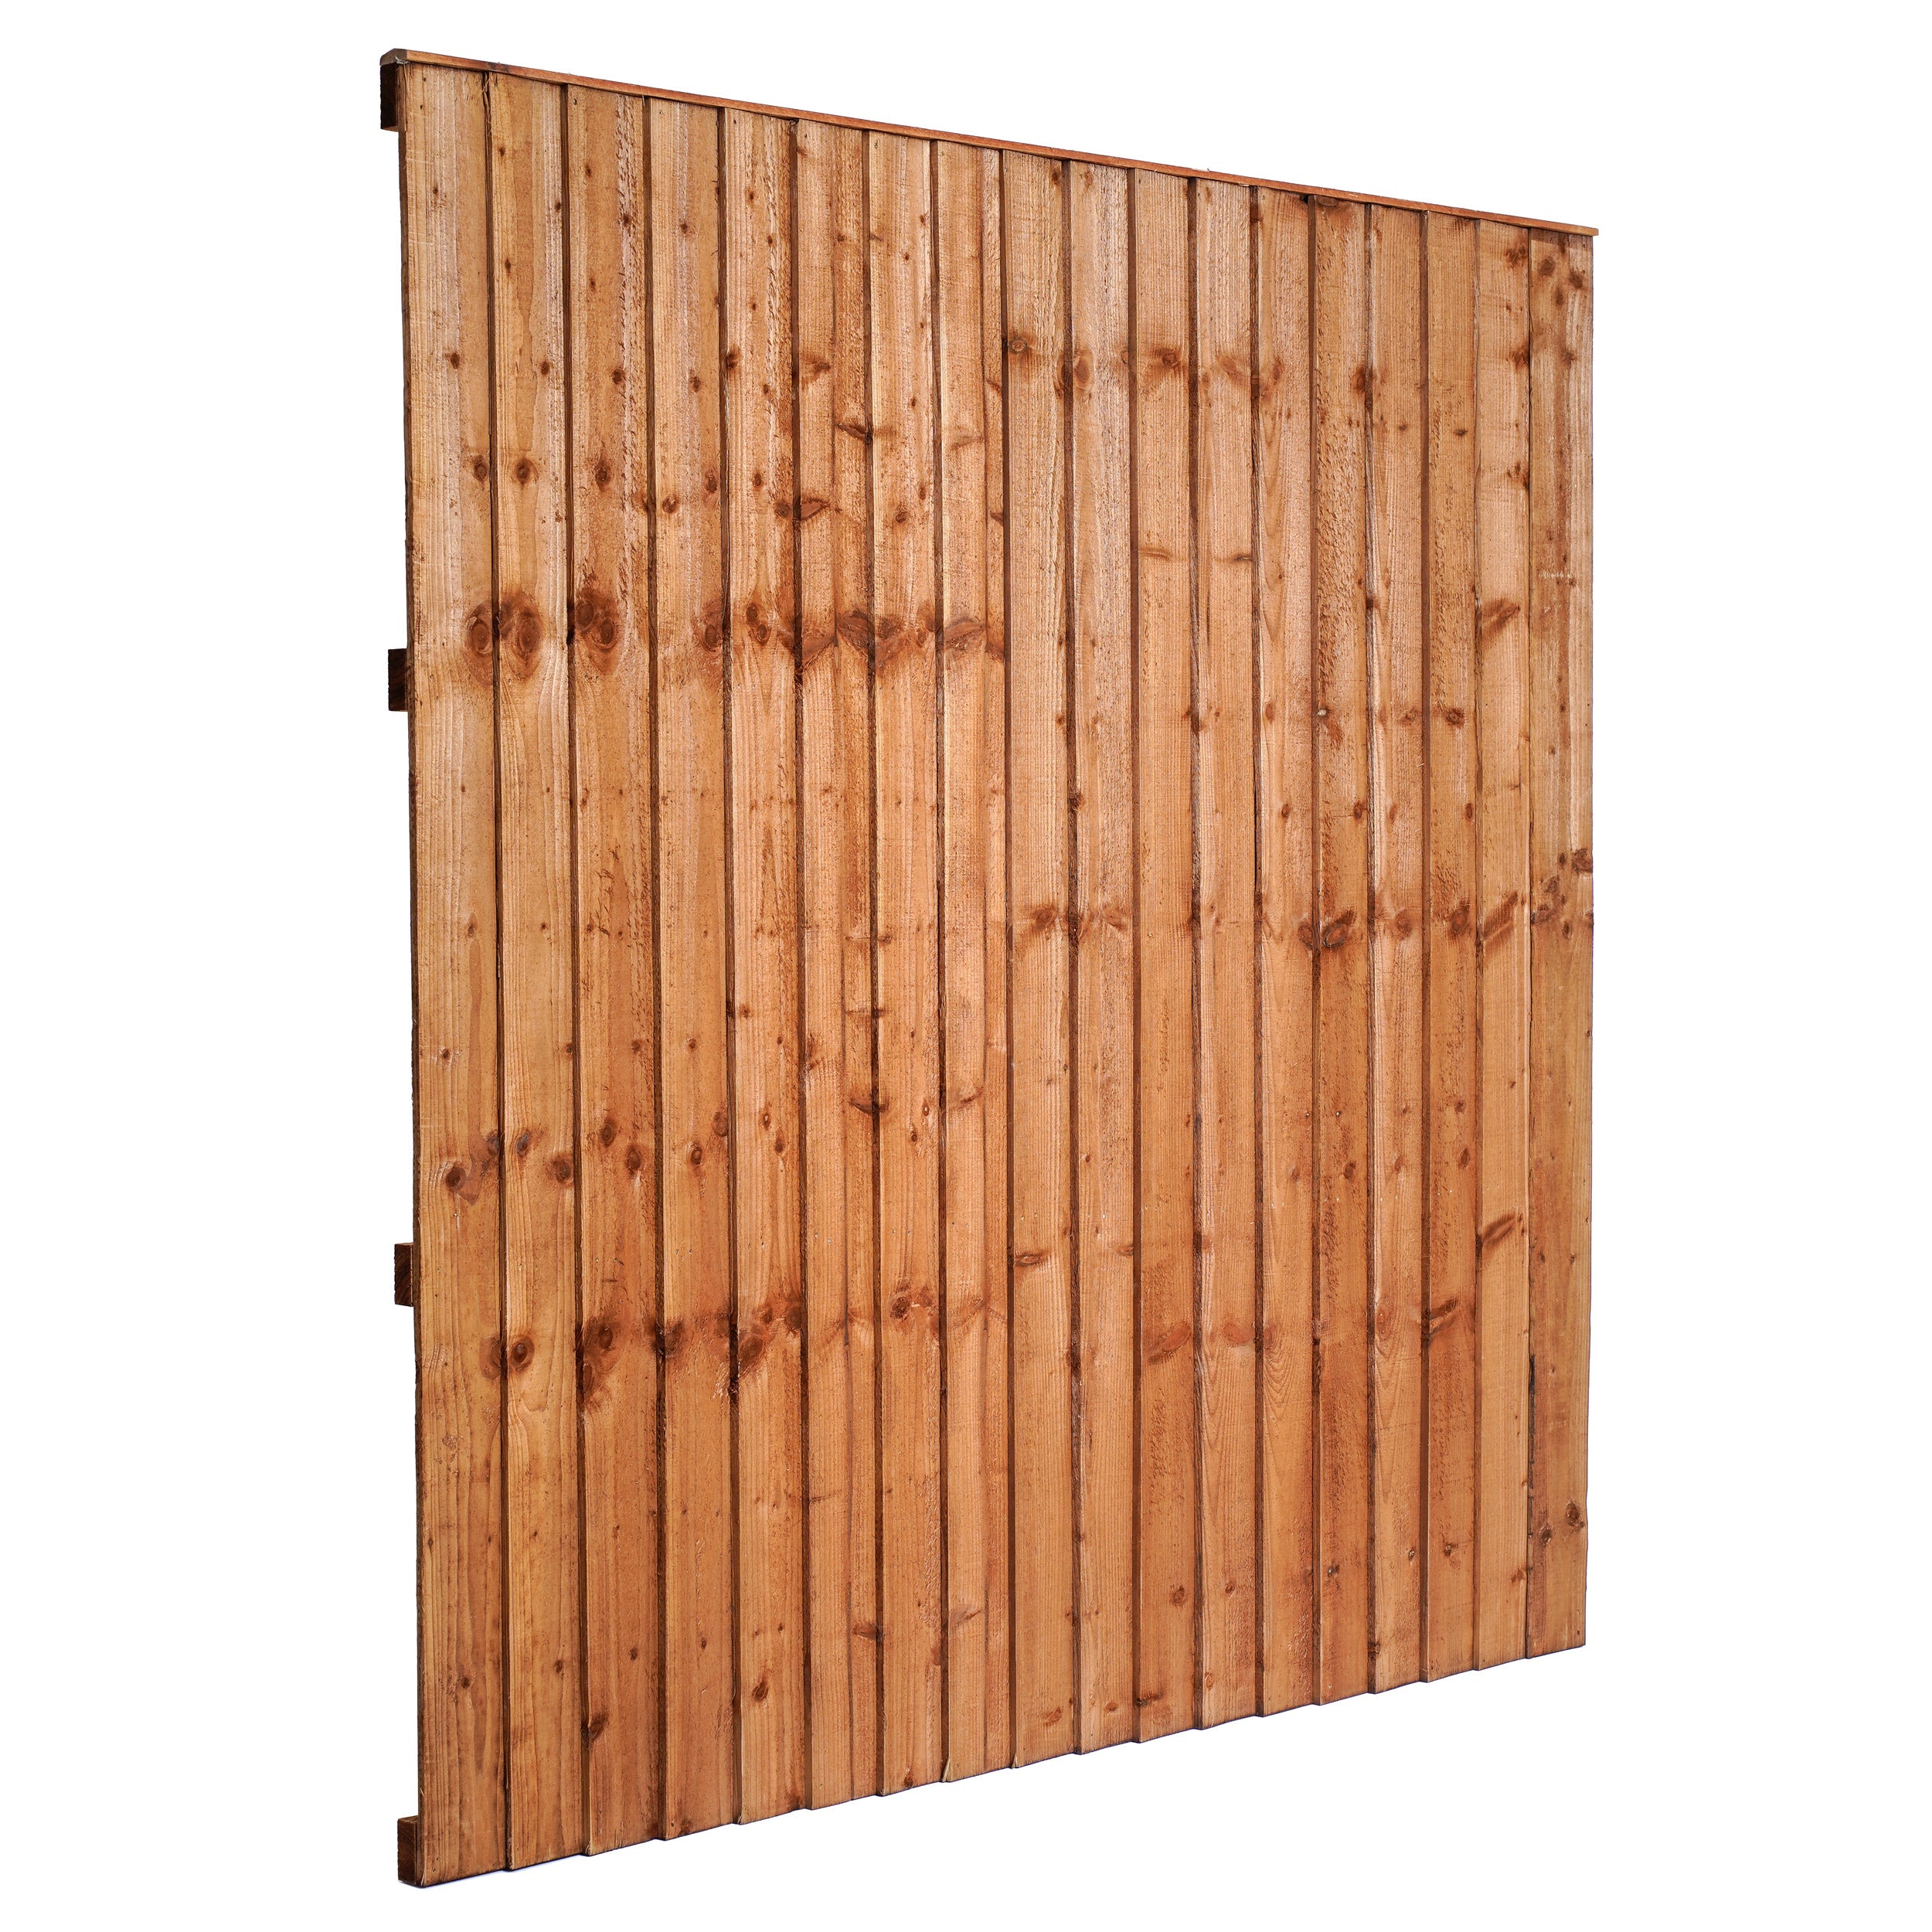 45 degree angle of 6ft x 6ft Heavy Duty Closeboard Panel - Pressure Treated Brown